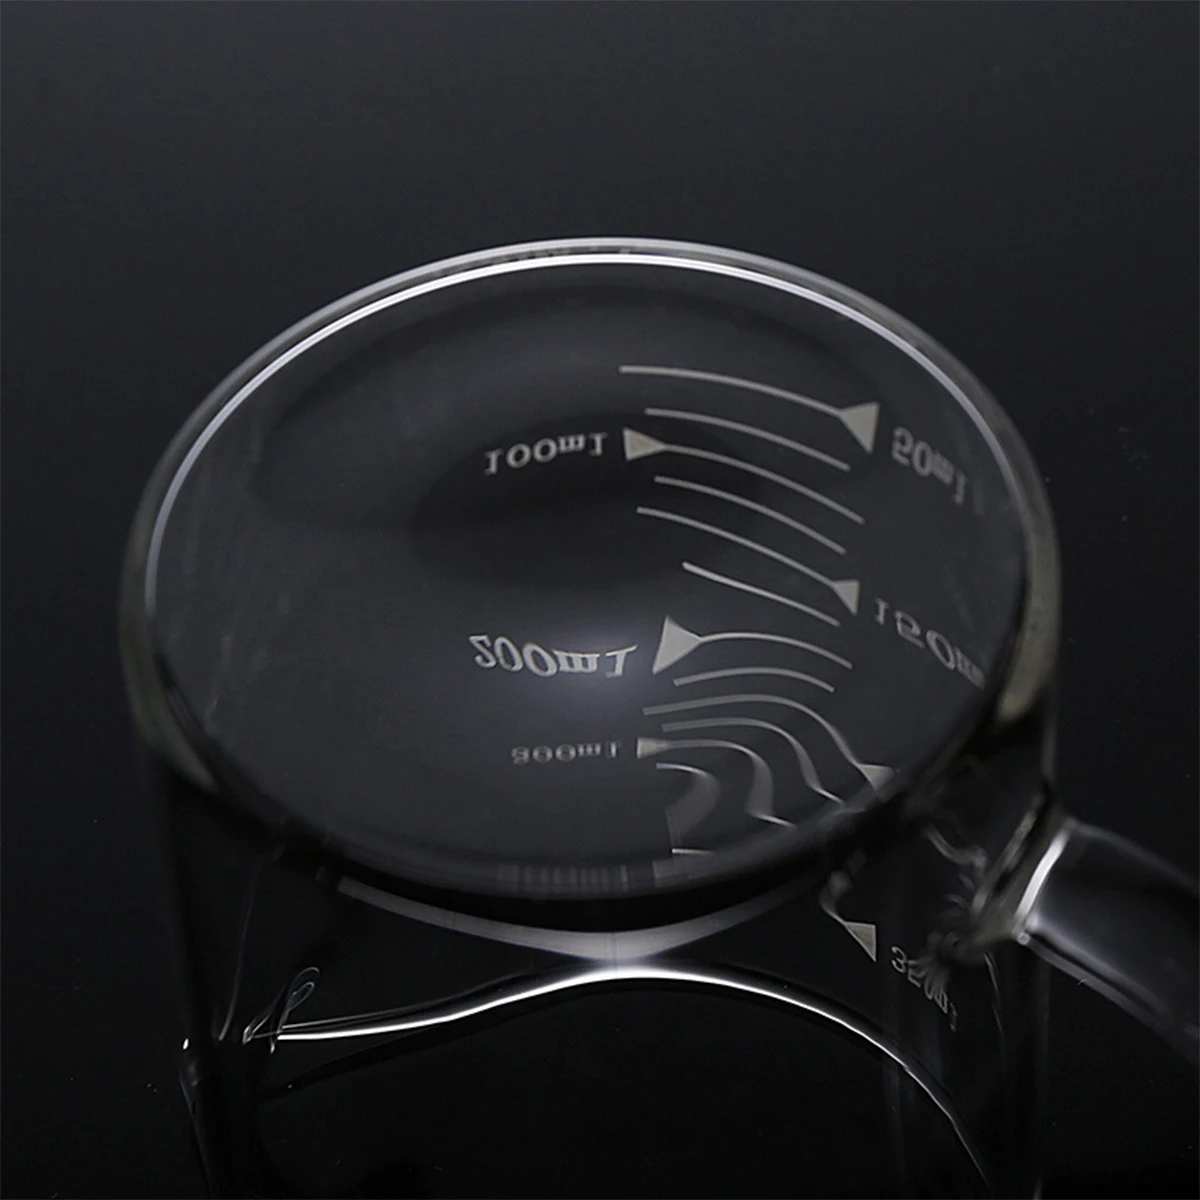 Electric Weight Sensor Professional Kitchen Measuring Tools Commercial Digital Display Scale Powder Liquid Handle Cup